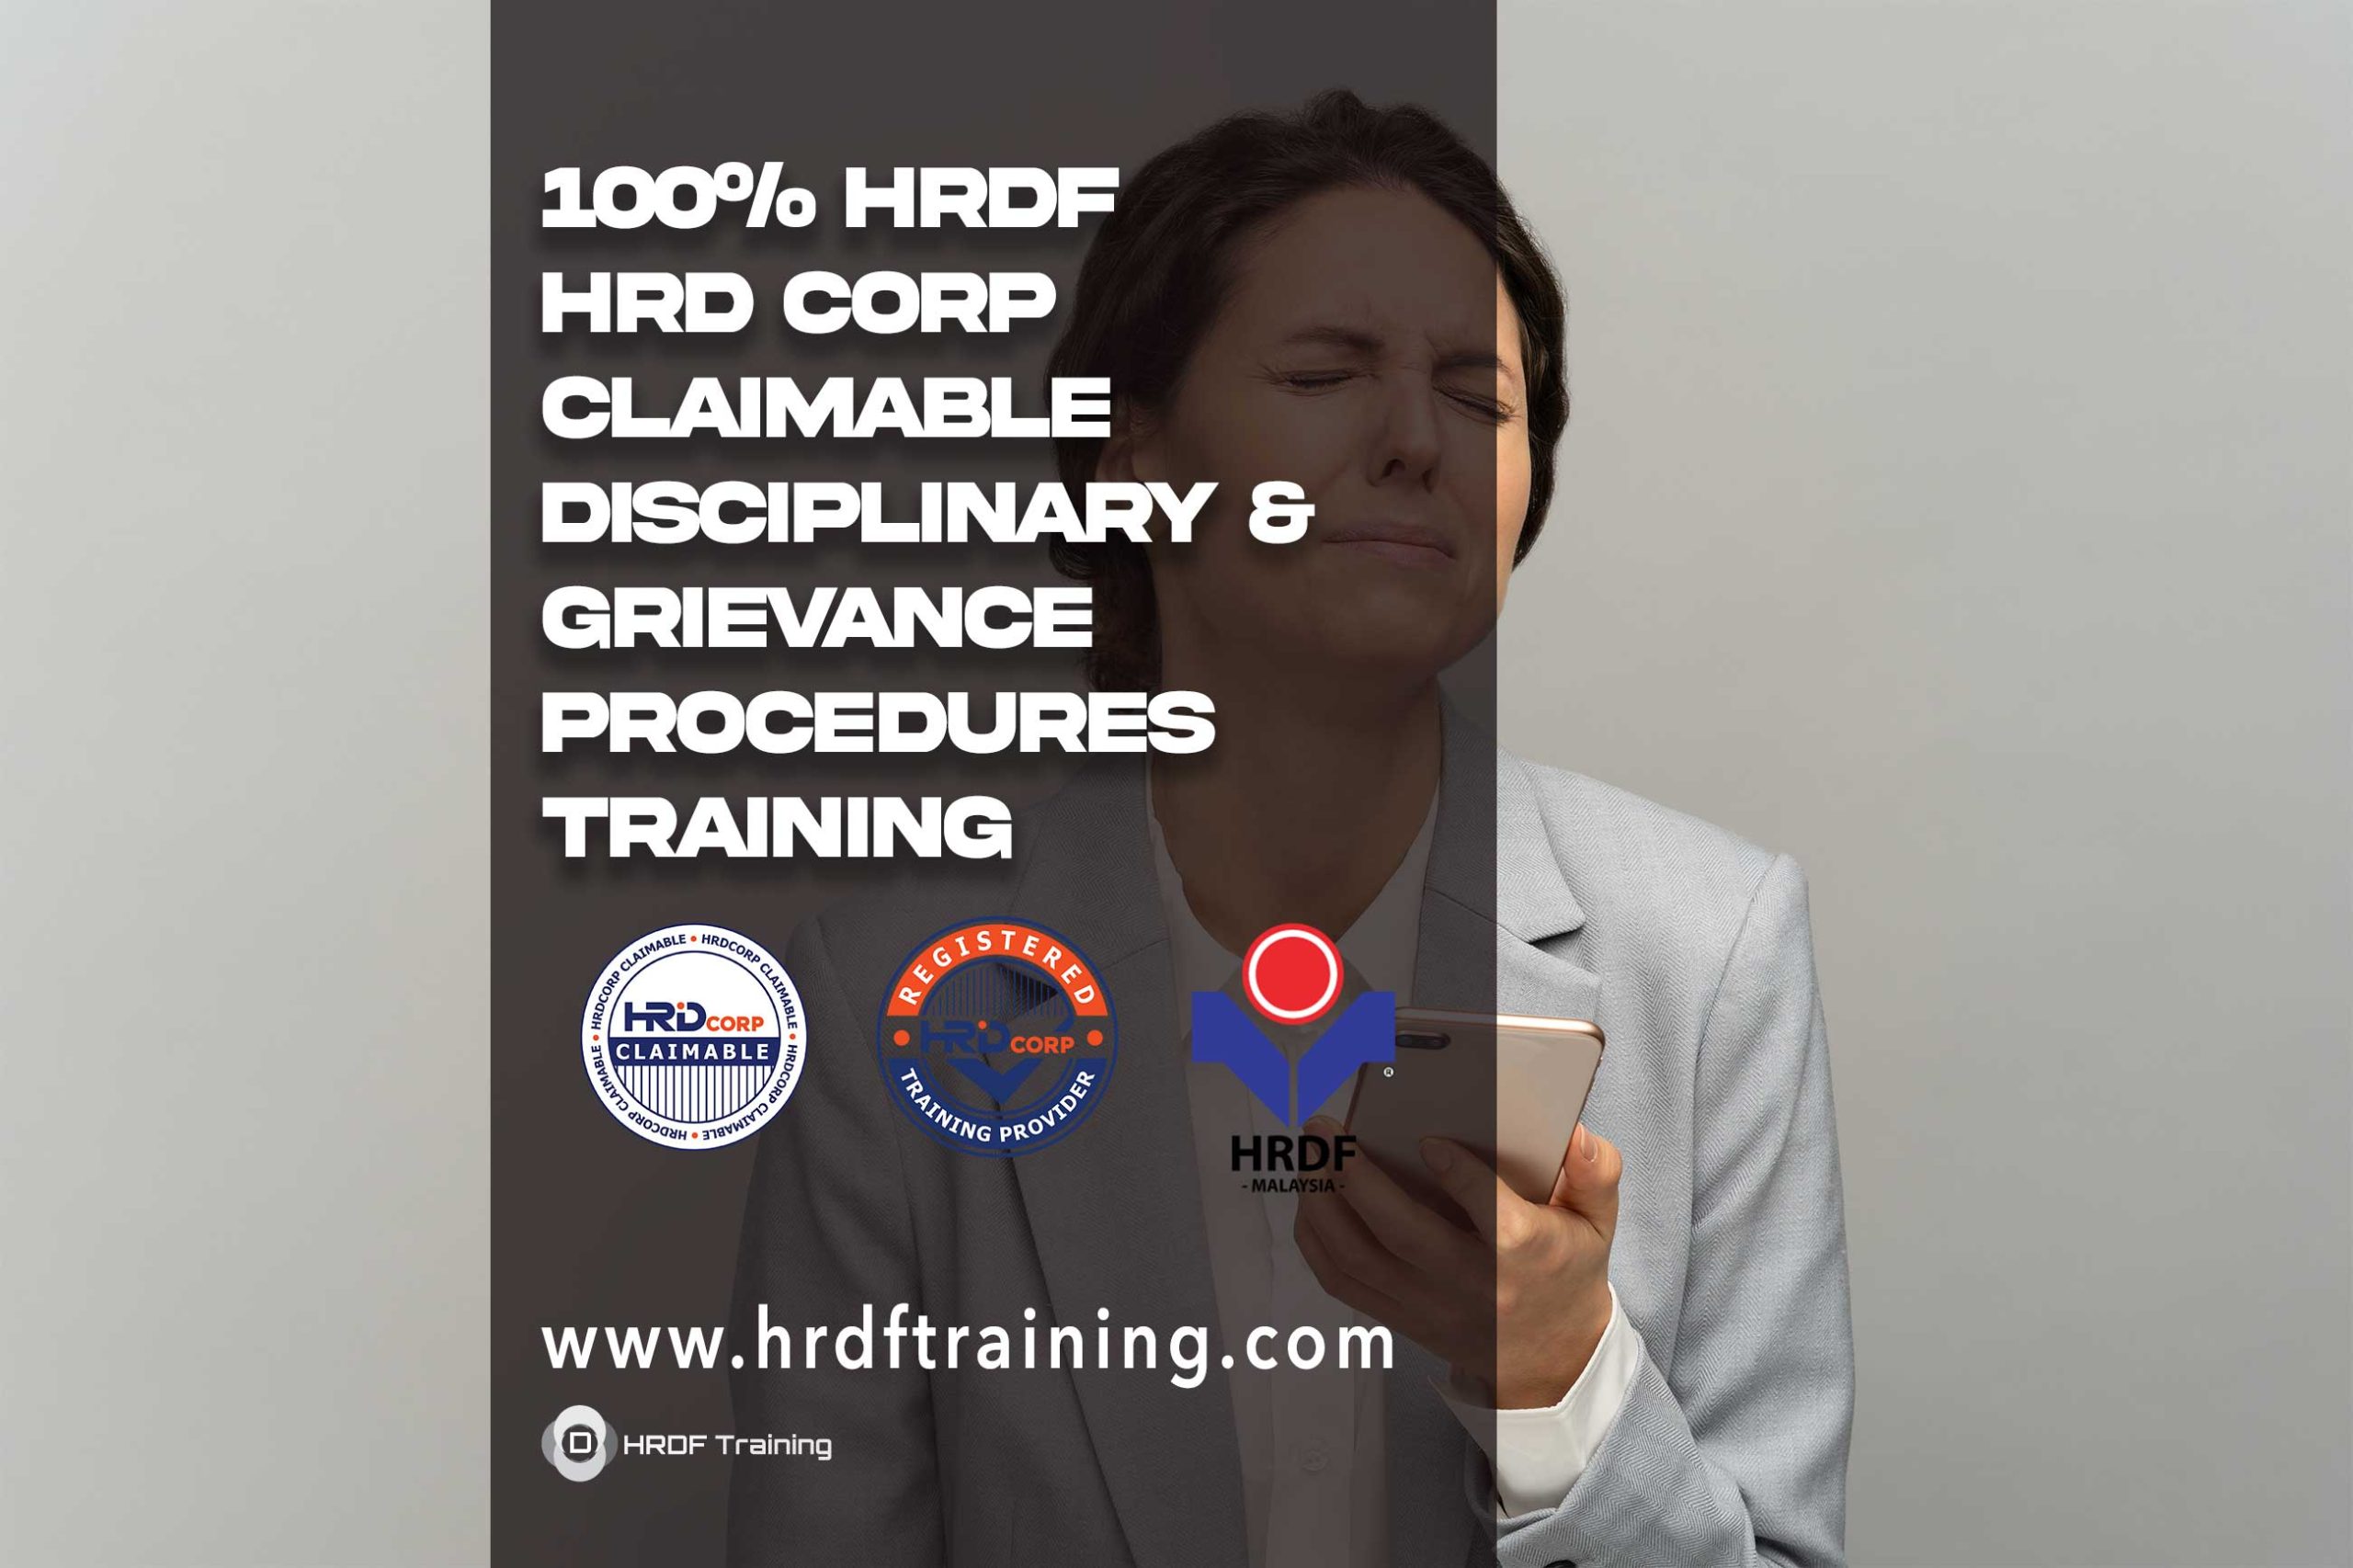 HRDF-HRD-Corp-Claimable-Disciplinary-&-Grievance-Procedures-Training